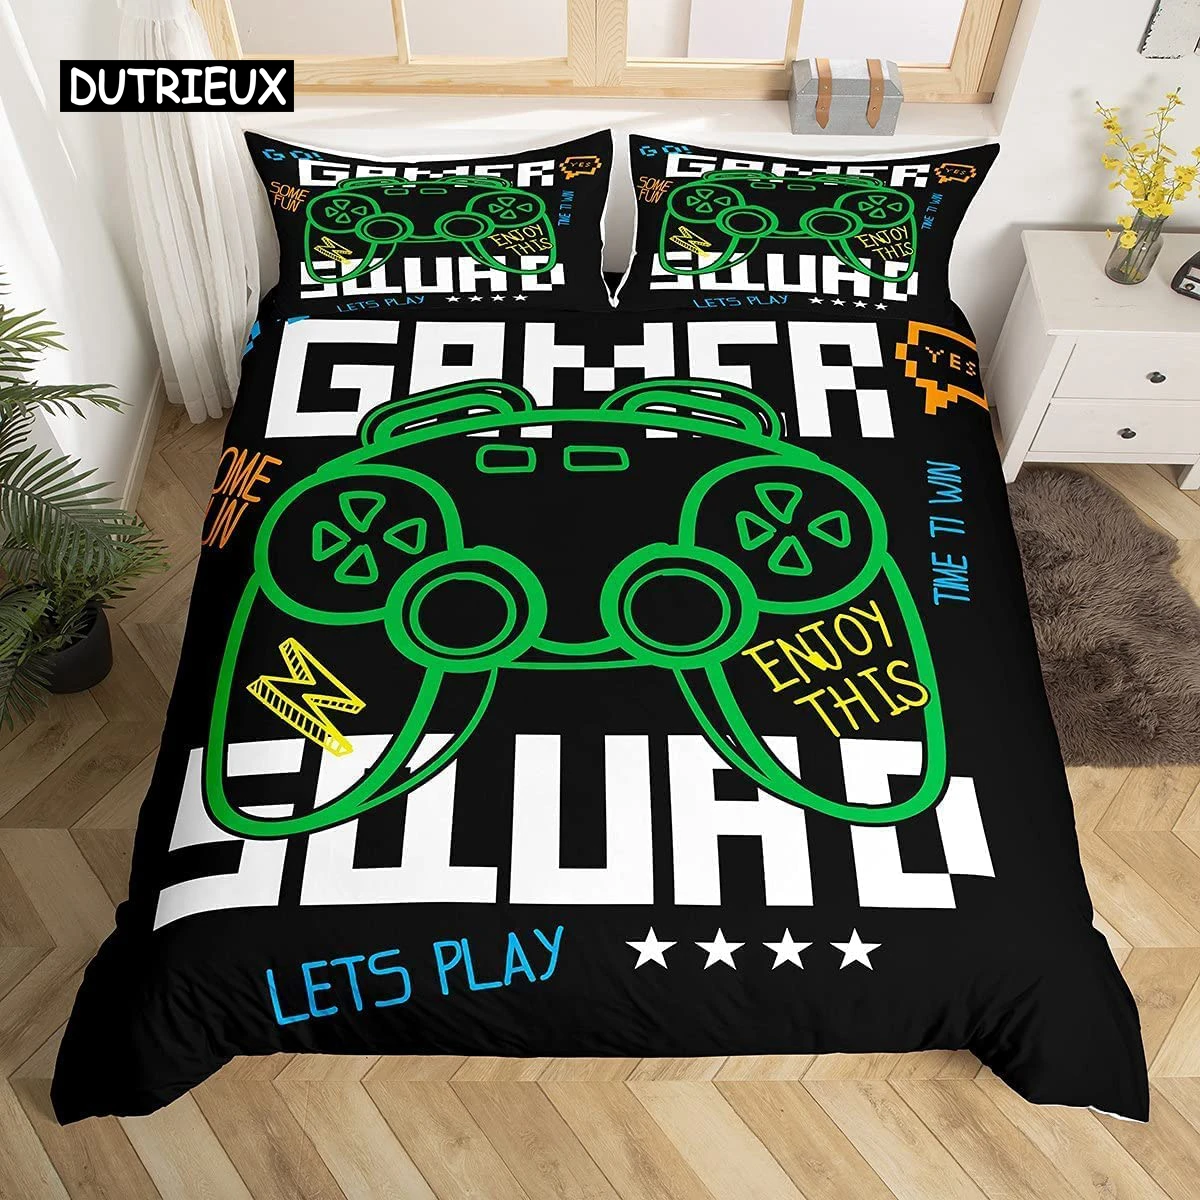 

Gamepad Duvet Cover Set Queen Video Game Twin Bedding Set Microfiber Green Cartoon Gamer Pattern Electronic Theme Quilt Cover